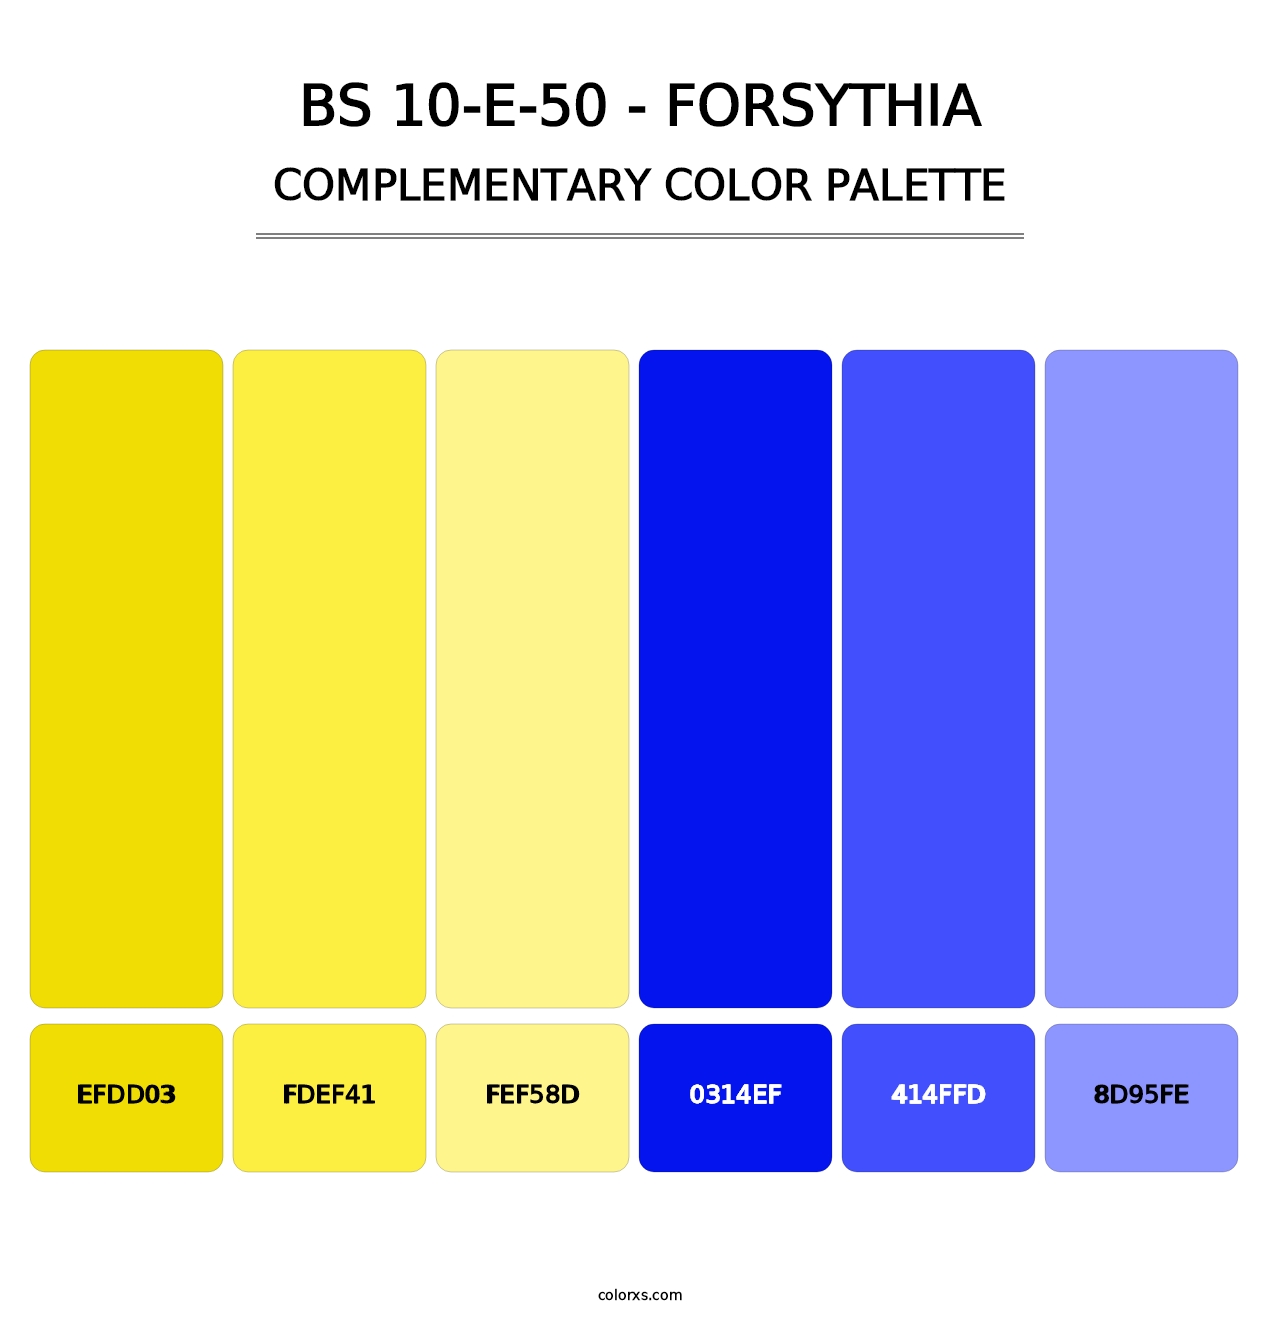 BS 10-E-50 - Forsythia - Complementary Color Palette